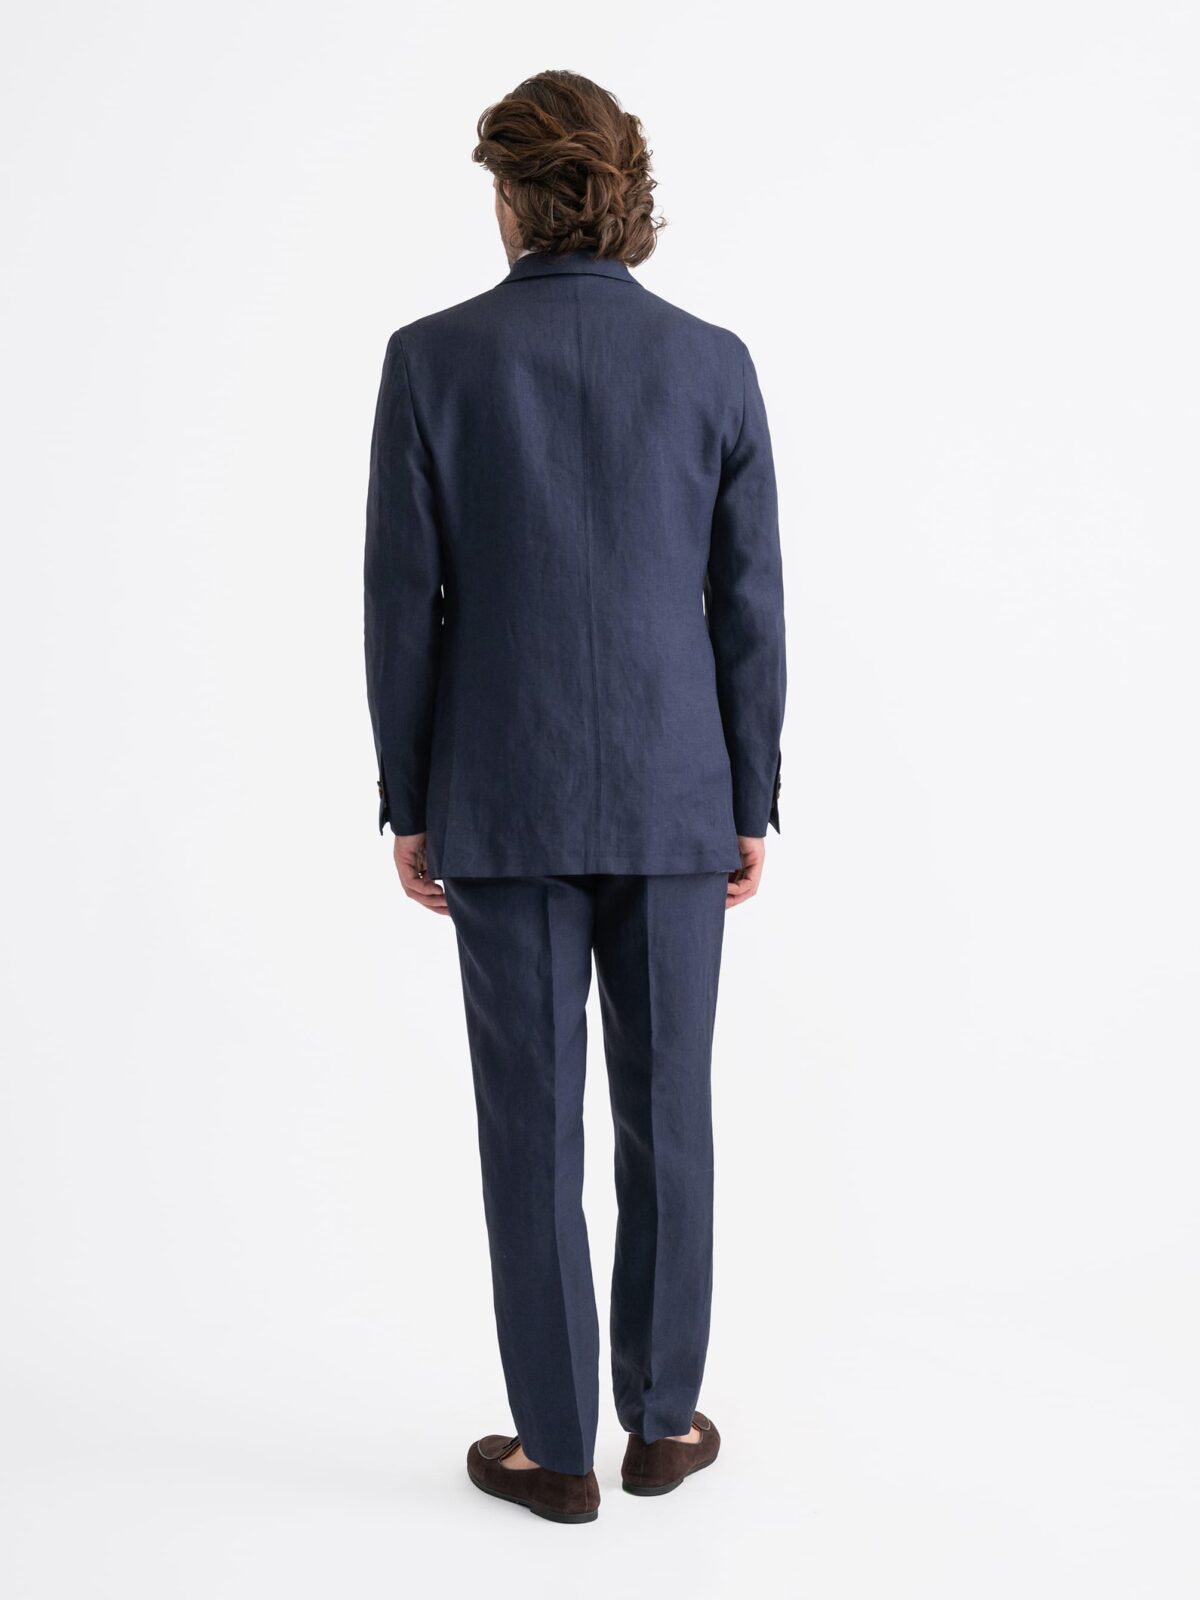 Premium Navy Blue double breasted wool Wide Leg Pant Suit